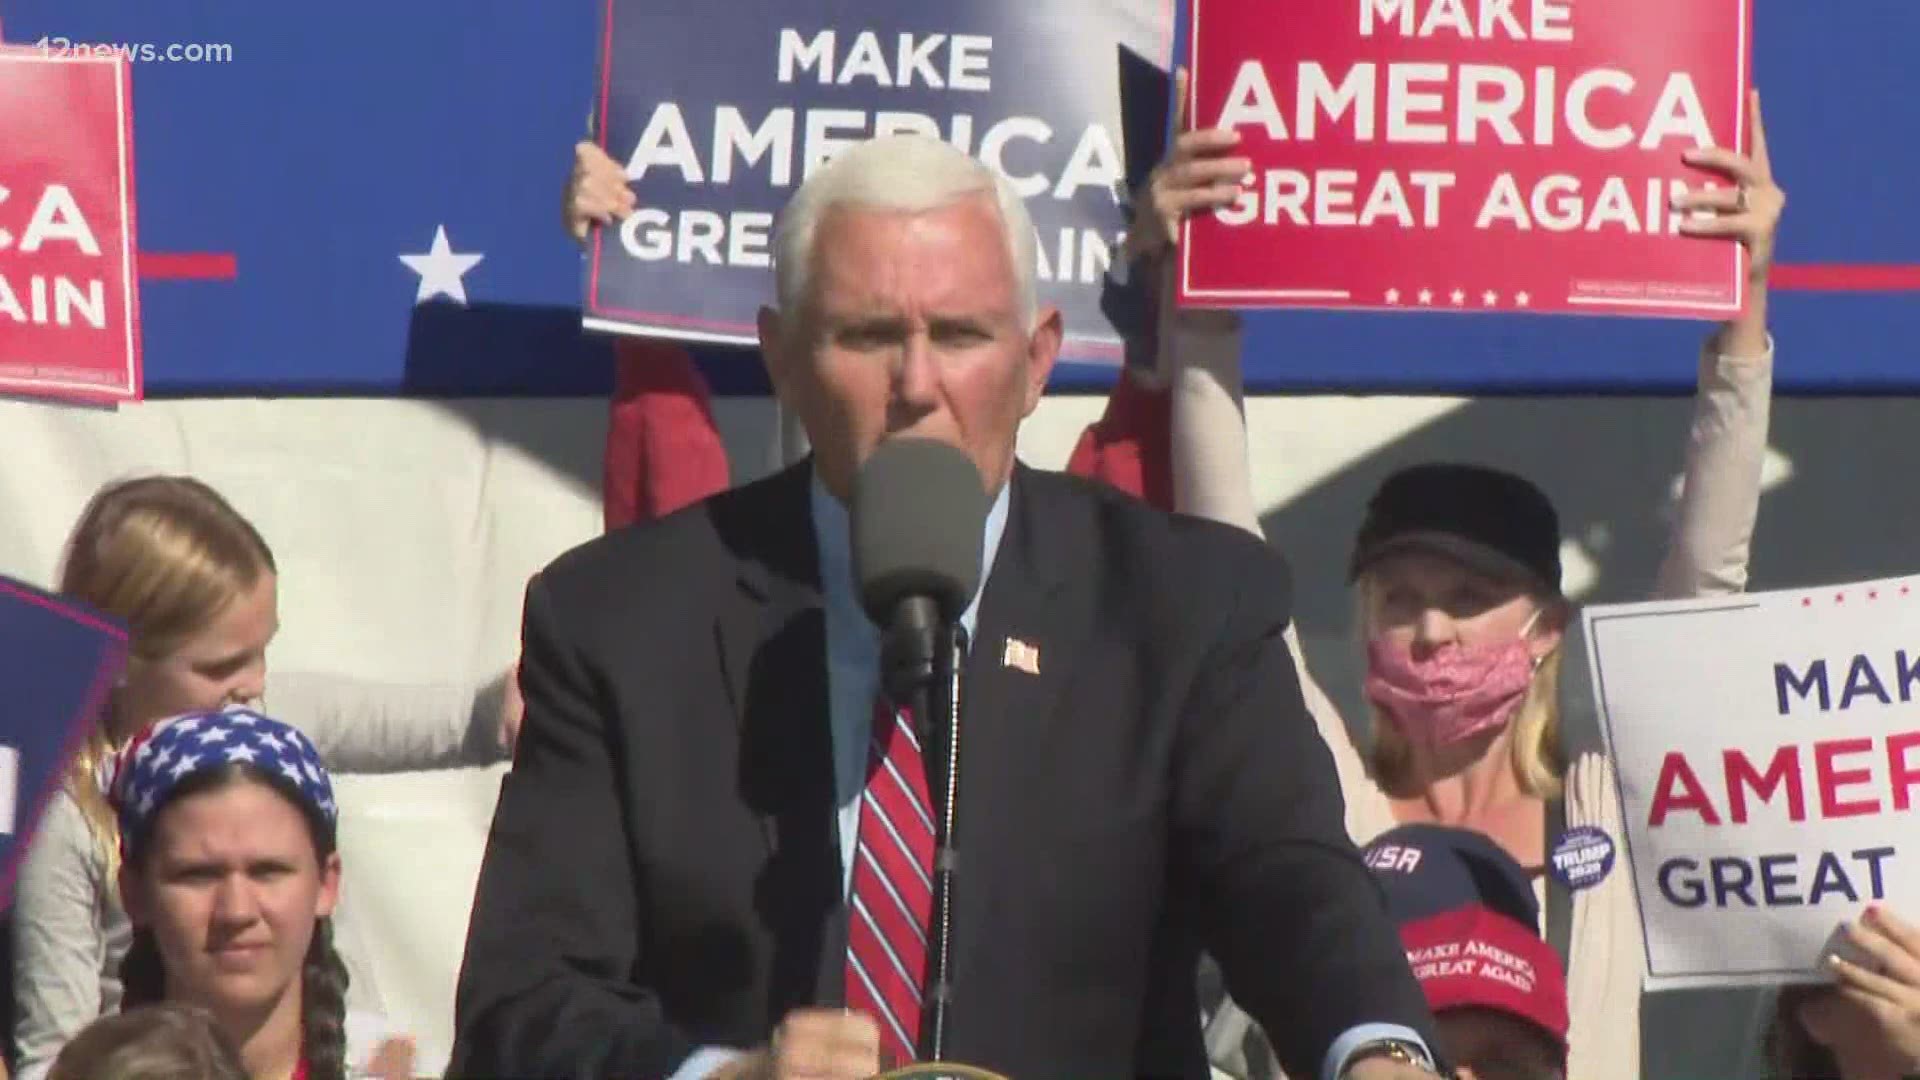 Battleground Arizona: Vice President Mike Pence was in AZ asking supporters to turn out at the polls. Pence appeared at Flagstaff and Tucson.